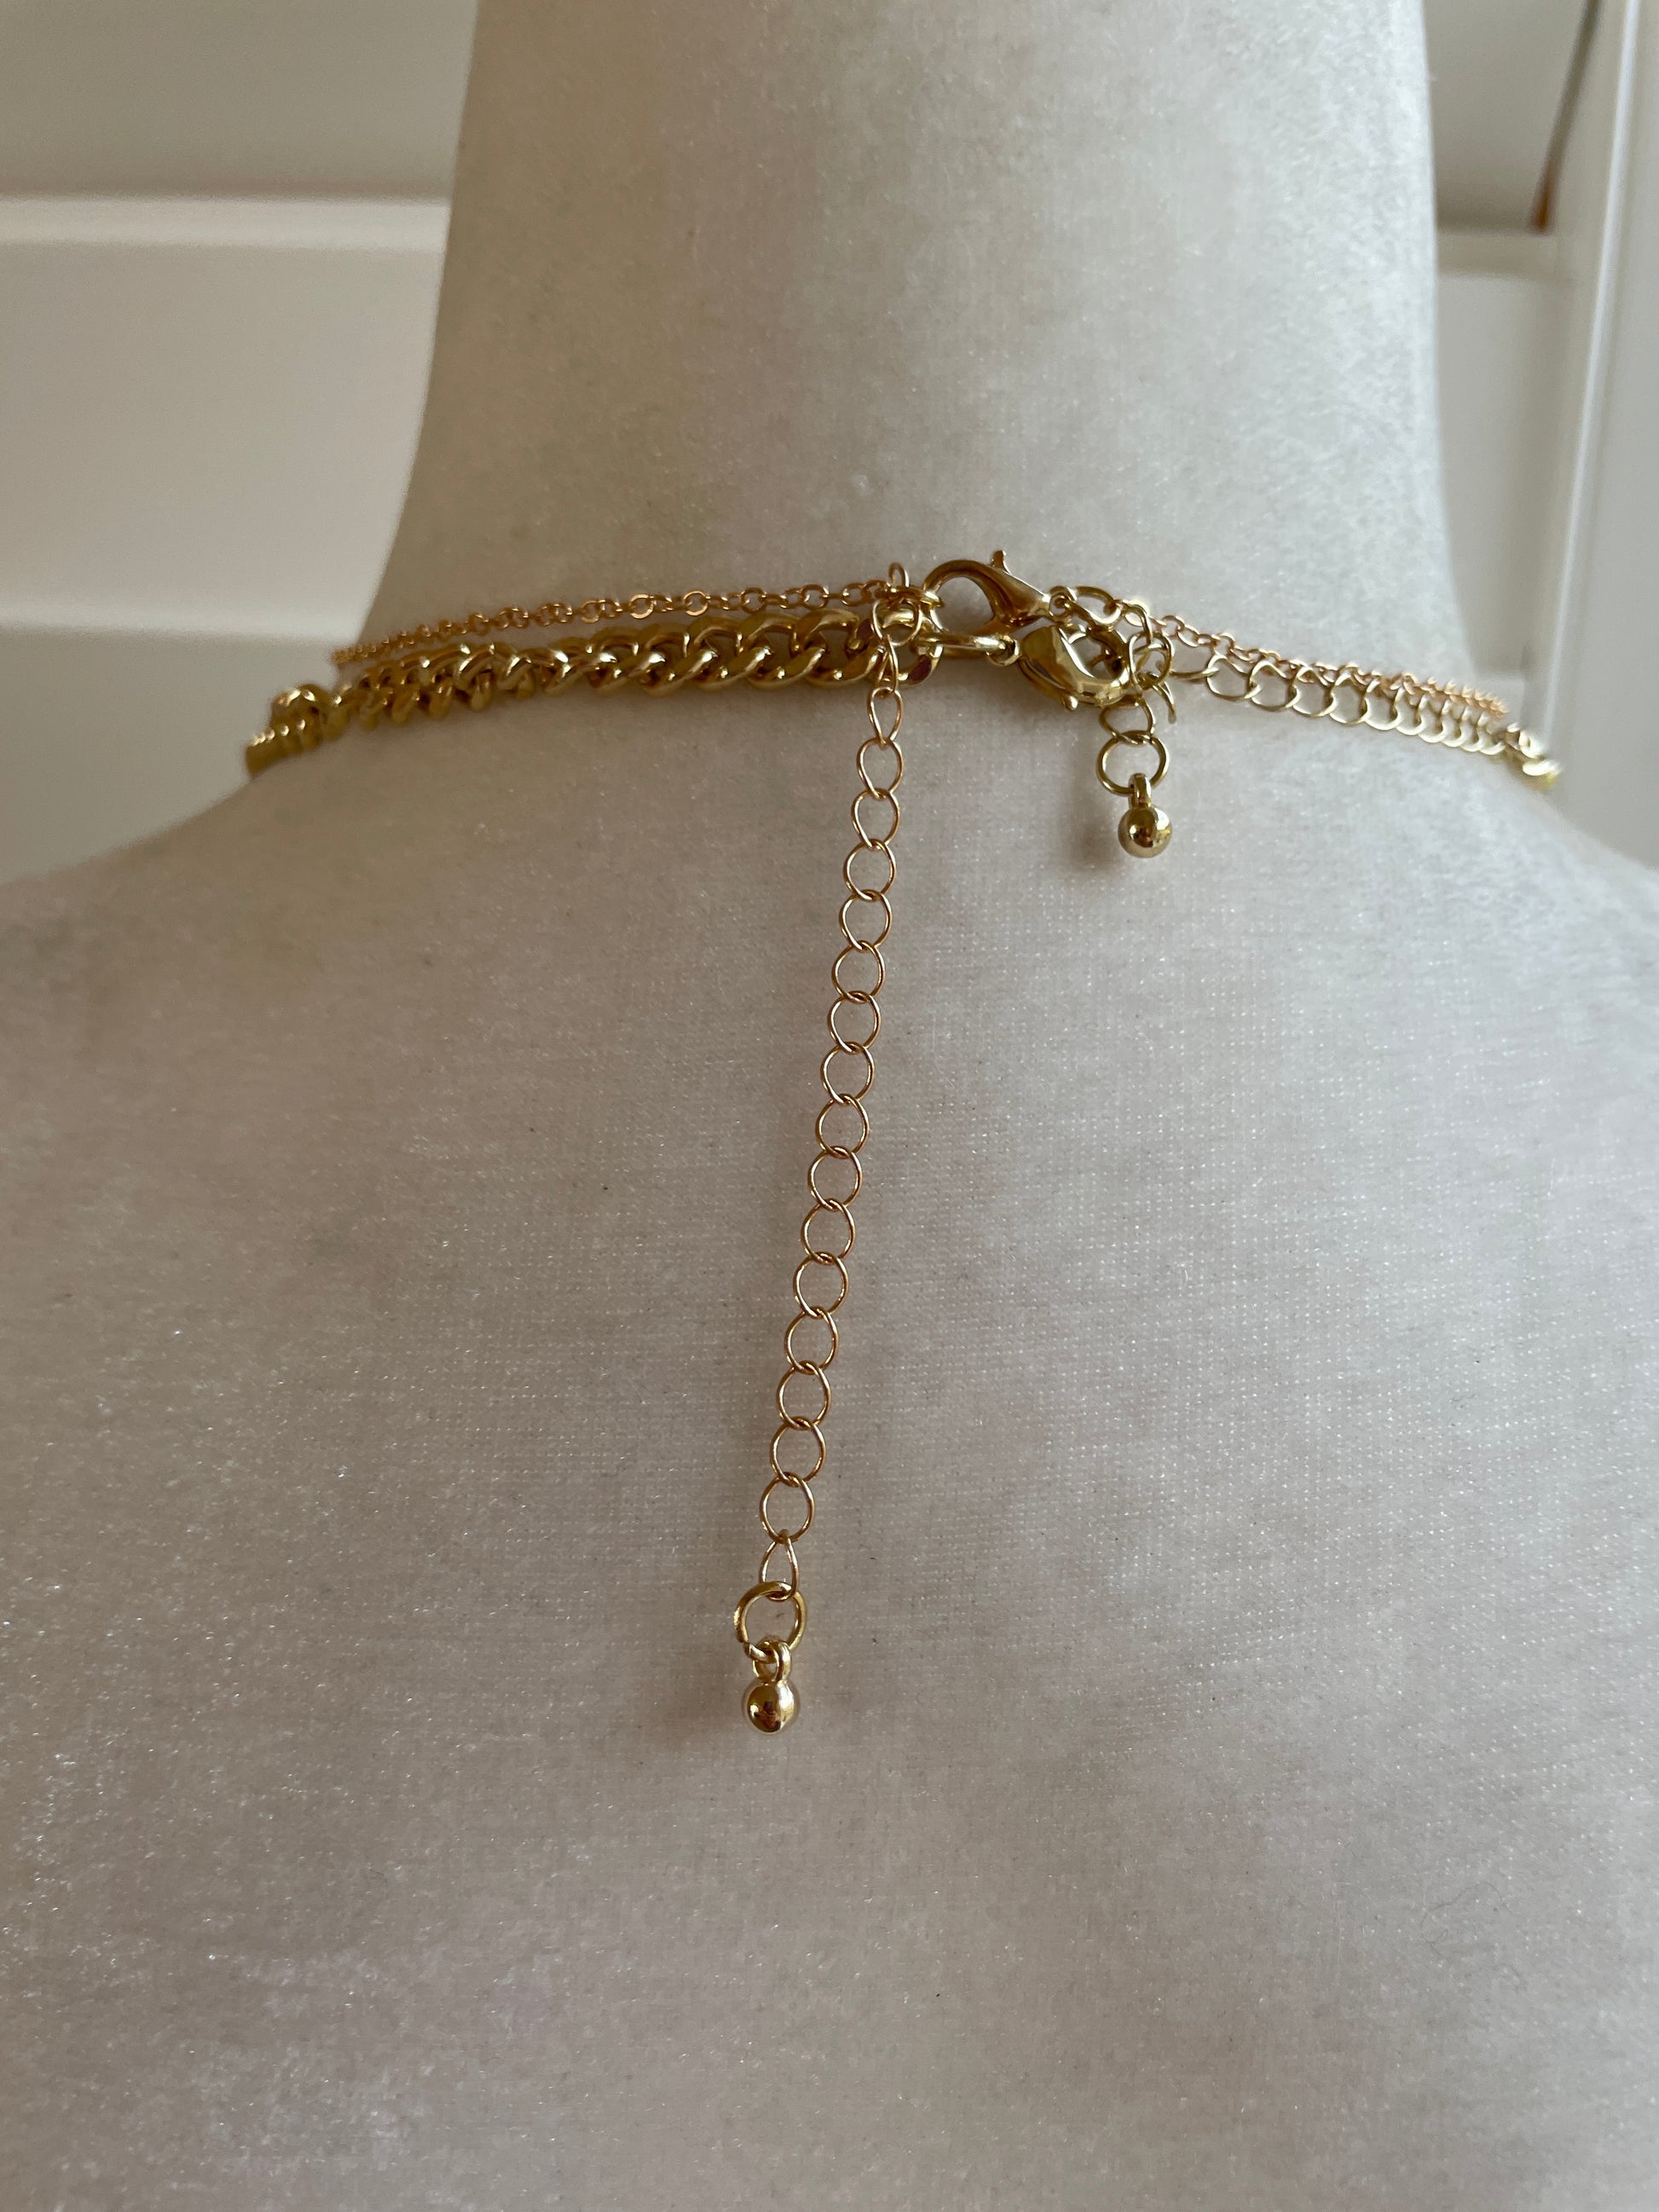  2000s Gold Tone Chains Lock Pendant 2 Layering Necklaces